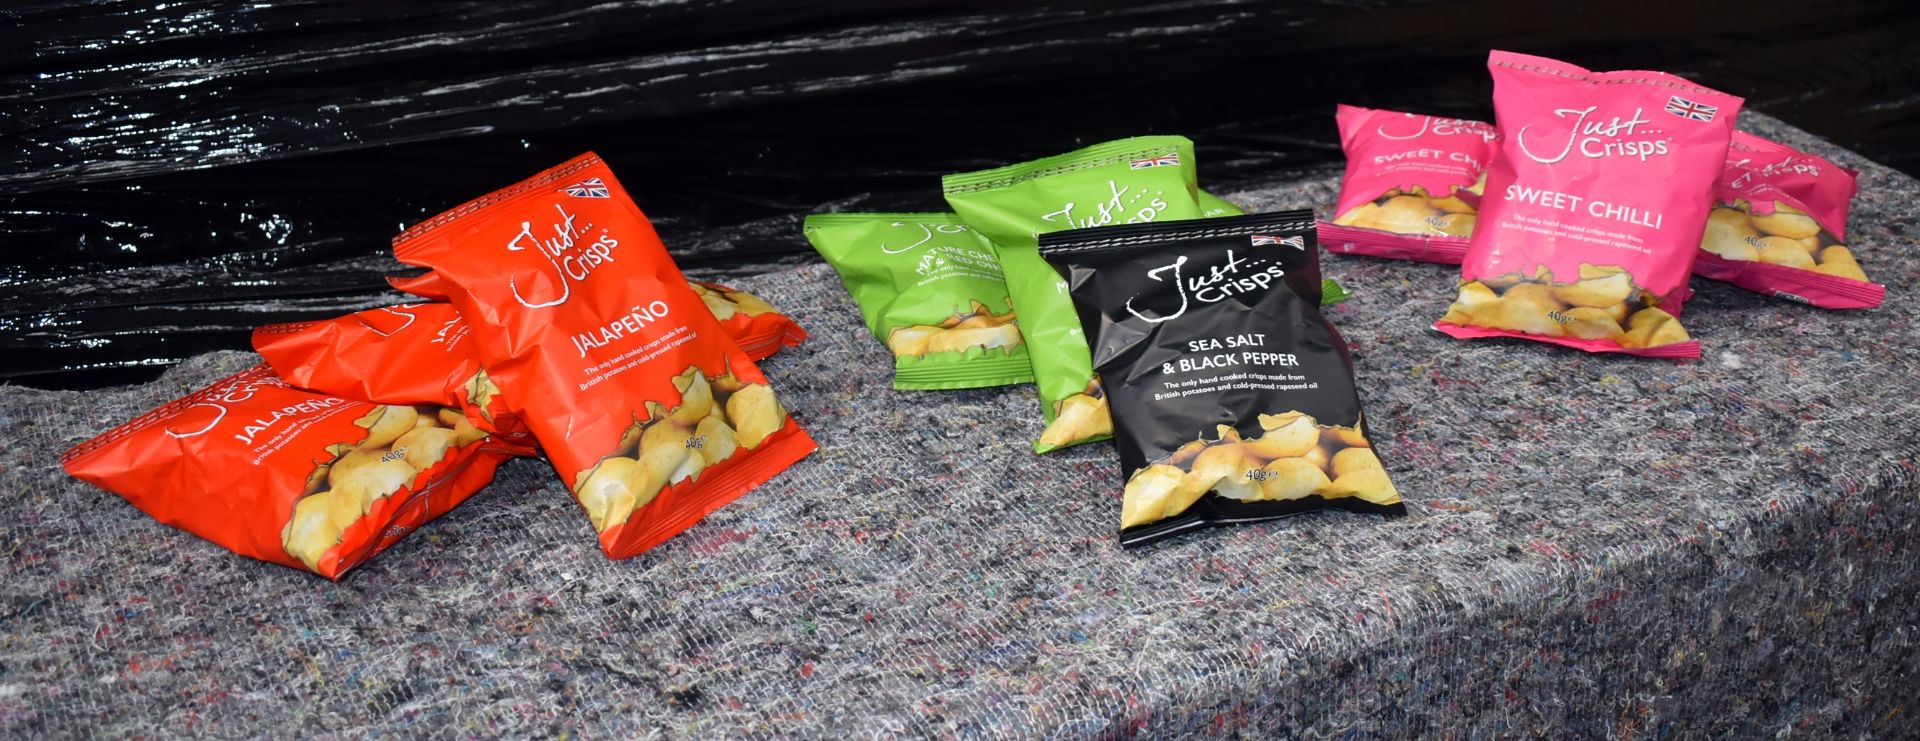 36 x Assorted Consumable Food Products Including Bags of JUST Flavoured Crisps- Ref: TCH405 - - Image 10 of 23